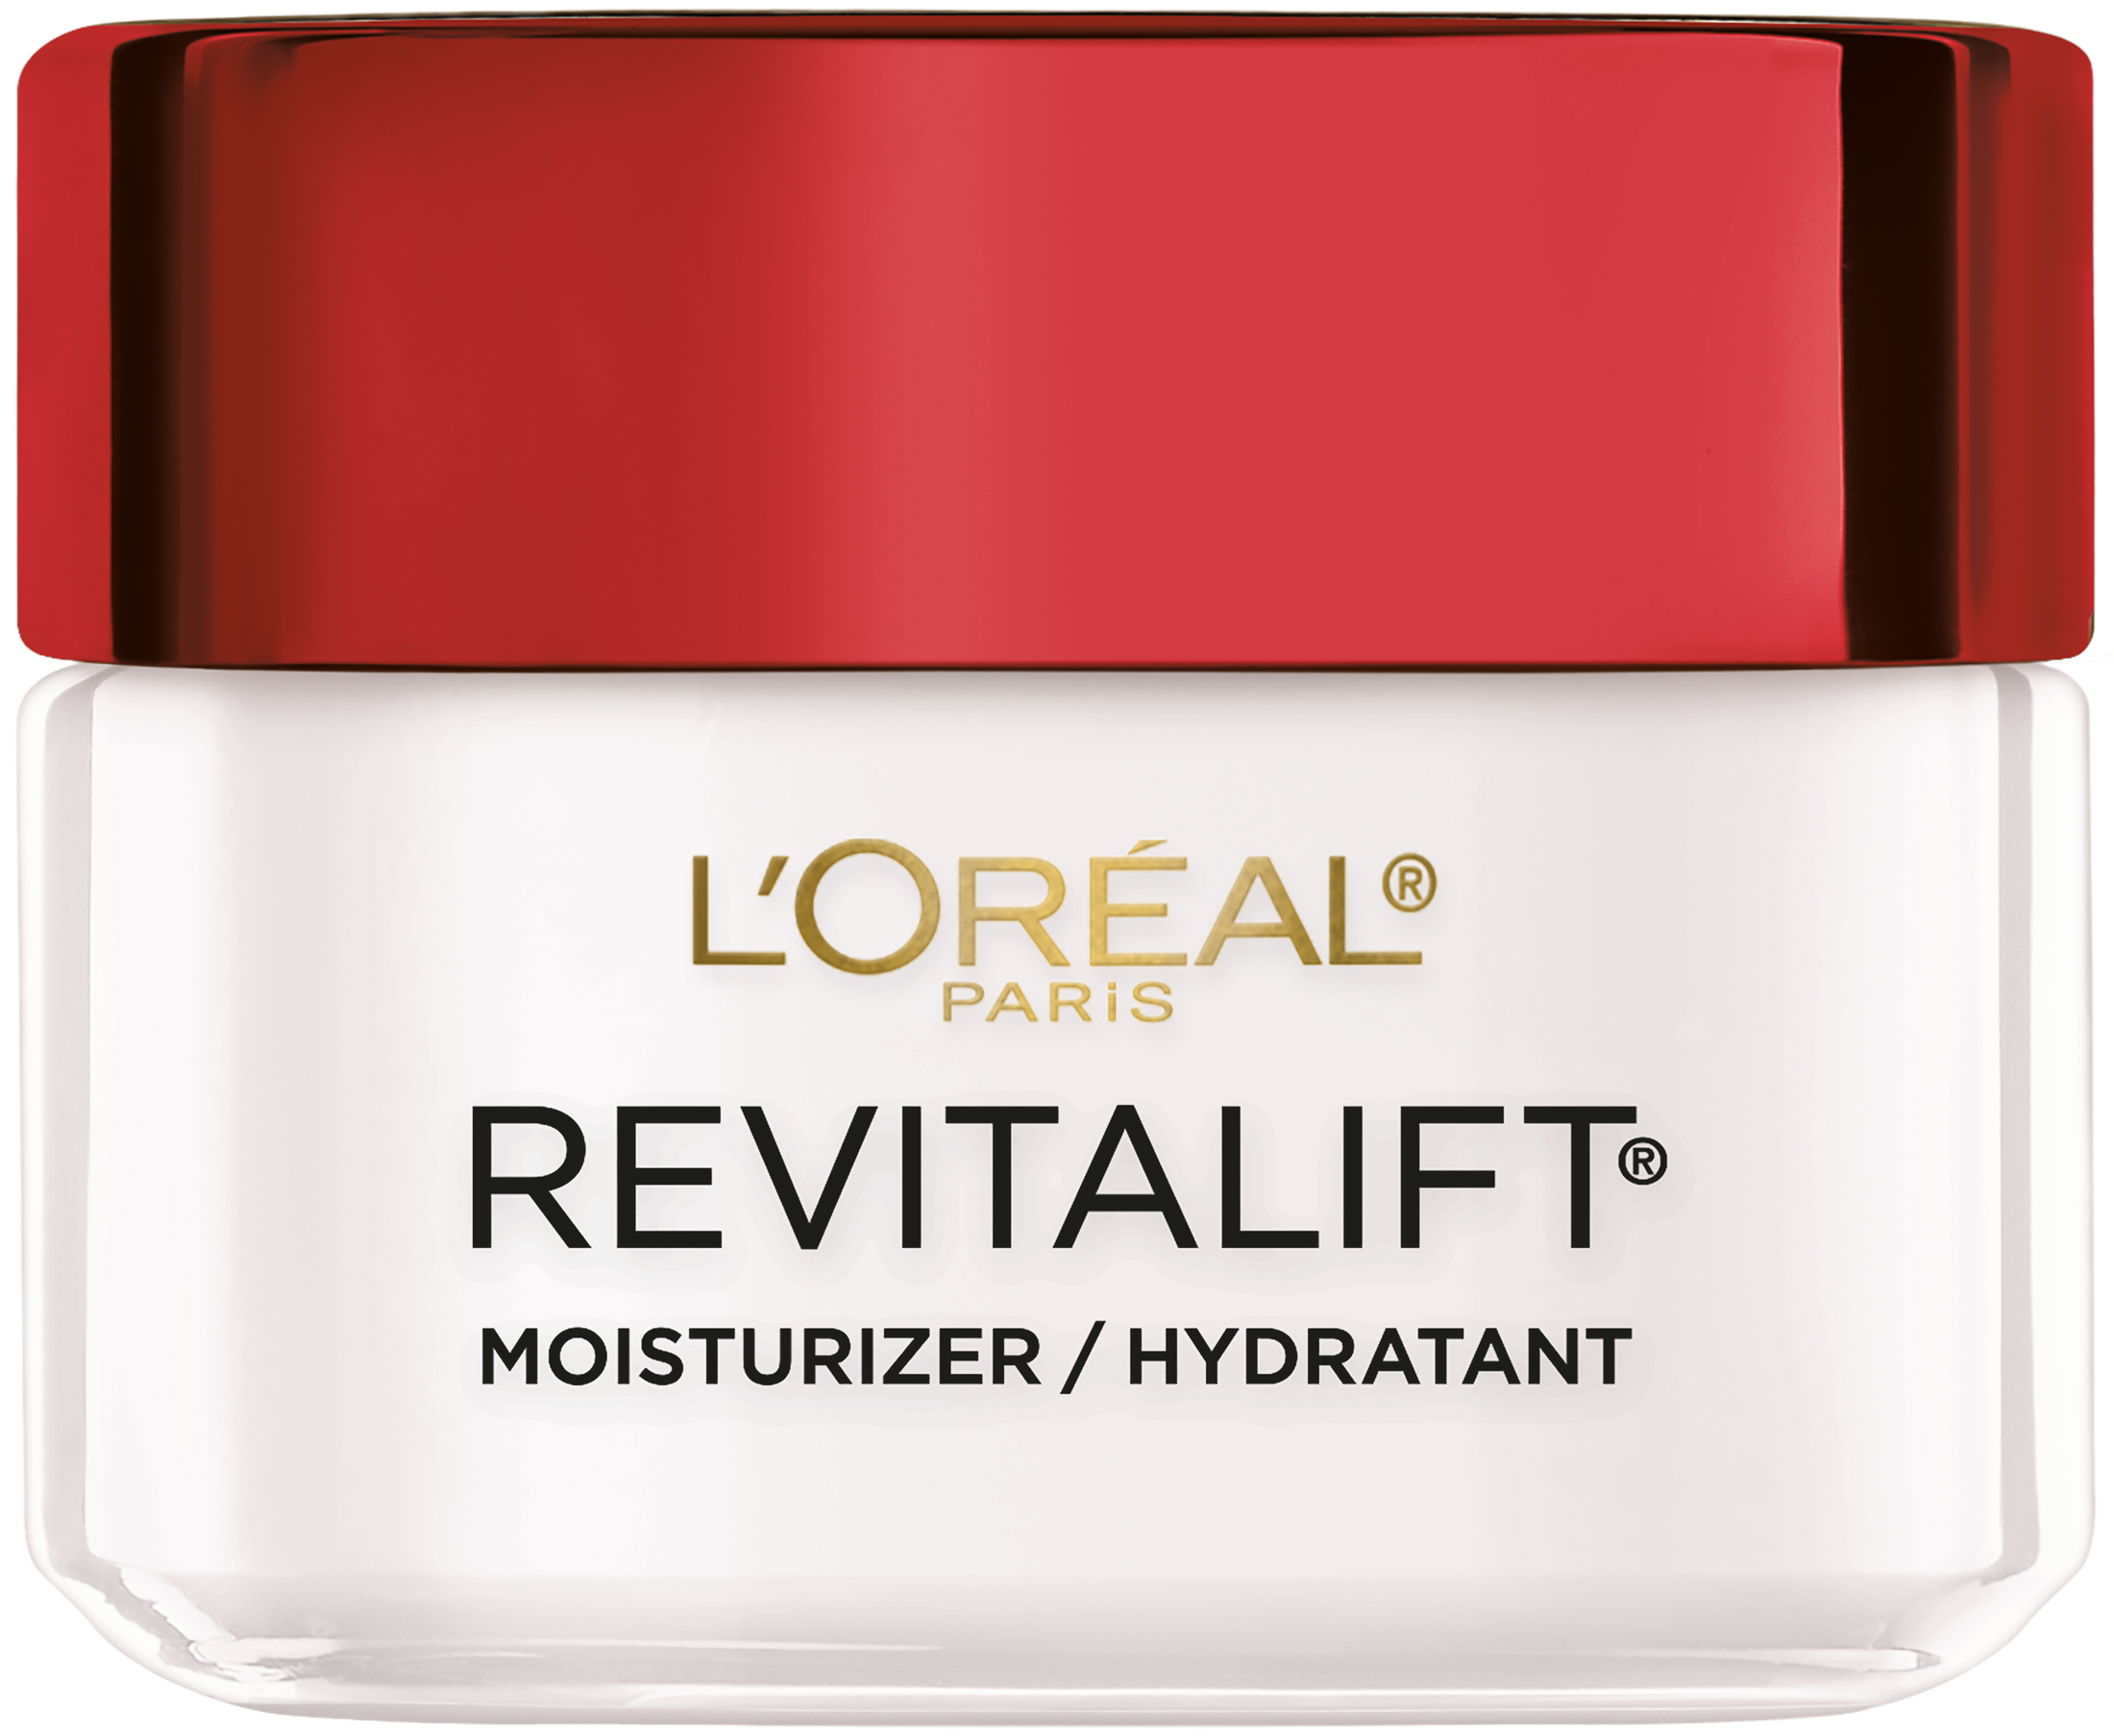 L'Oreal Paris Revitalift Anti-Wrinkle and Firming Face Moisturizer, 1.7 oz - image 1 of 10